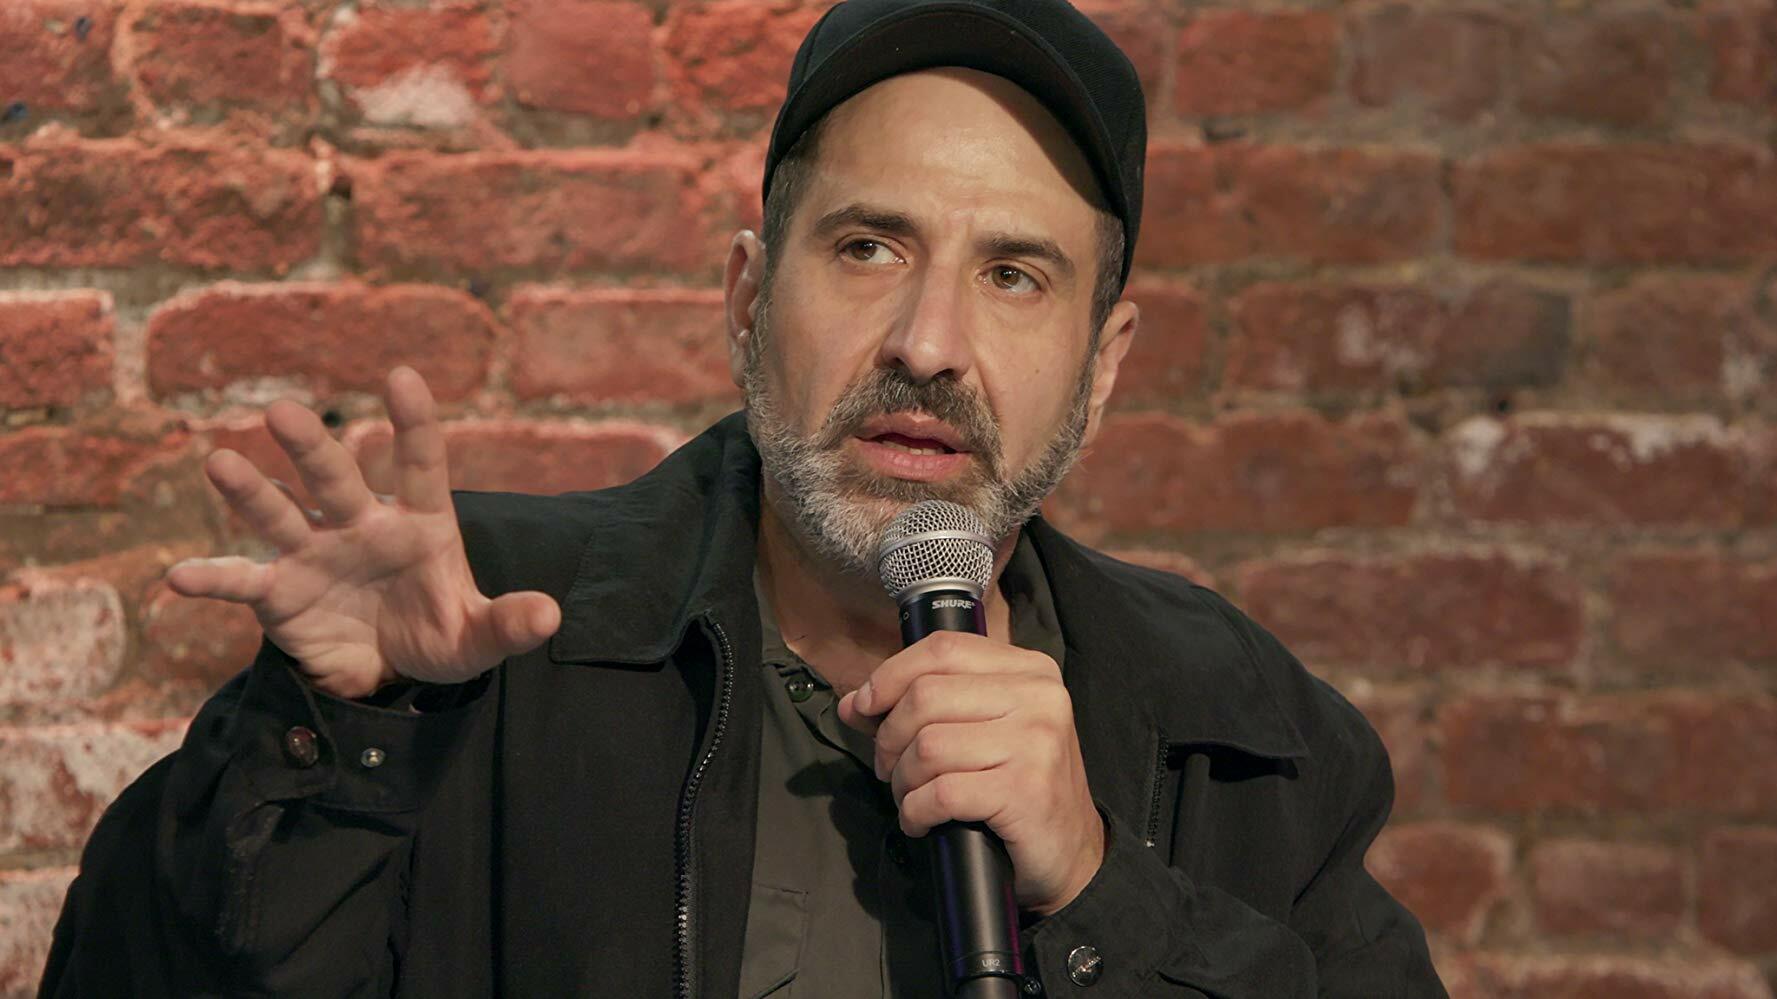 Stand-up comedian Dave Attell performs at WHBPAC on July 29. COURTESY WHBPAC